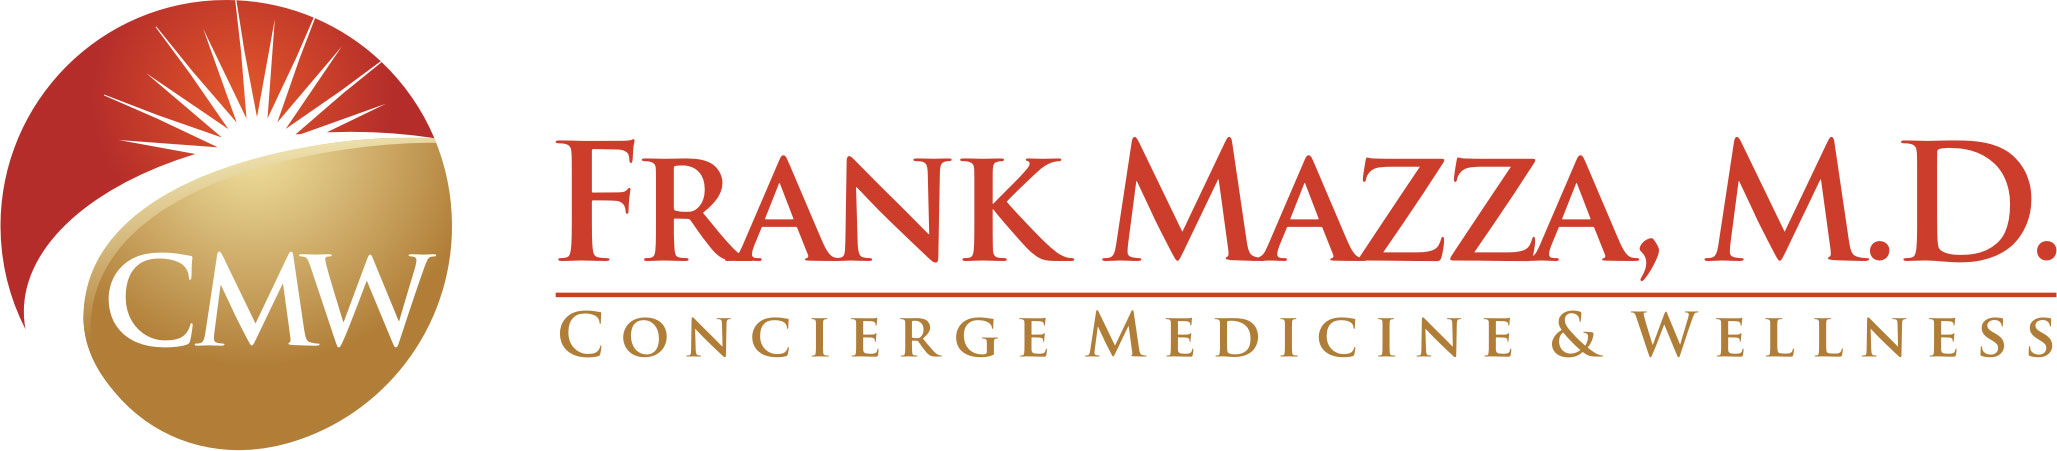 concierge medicine and wellness by frank mazza m.d.